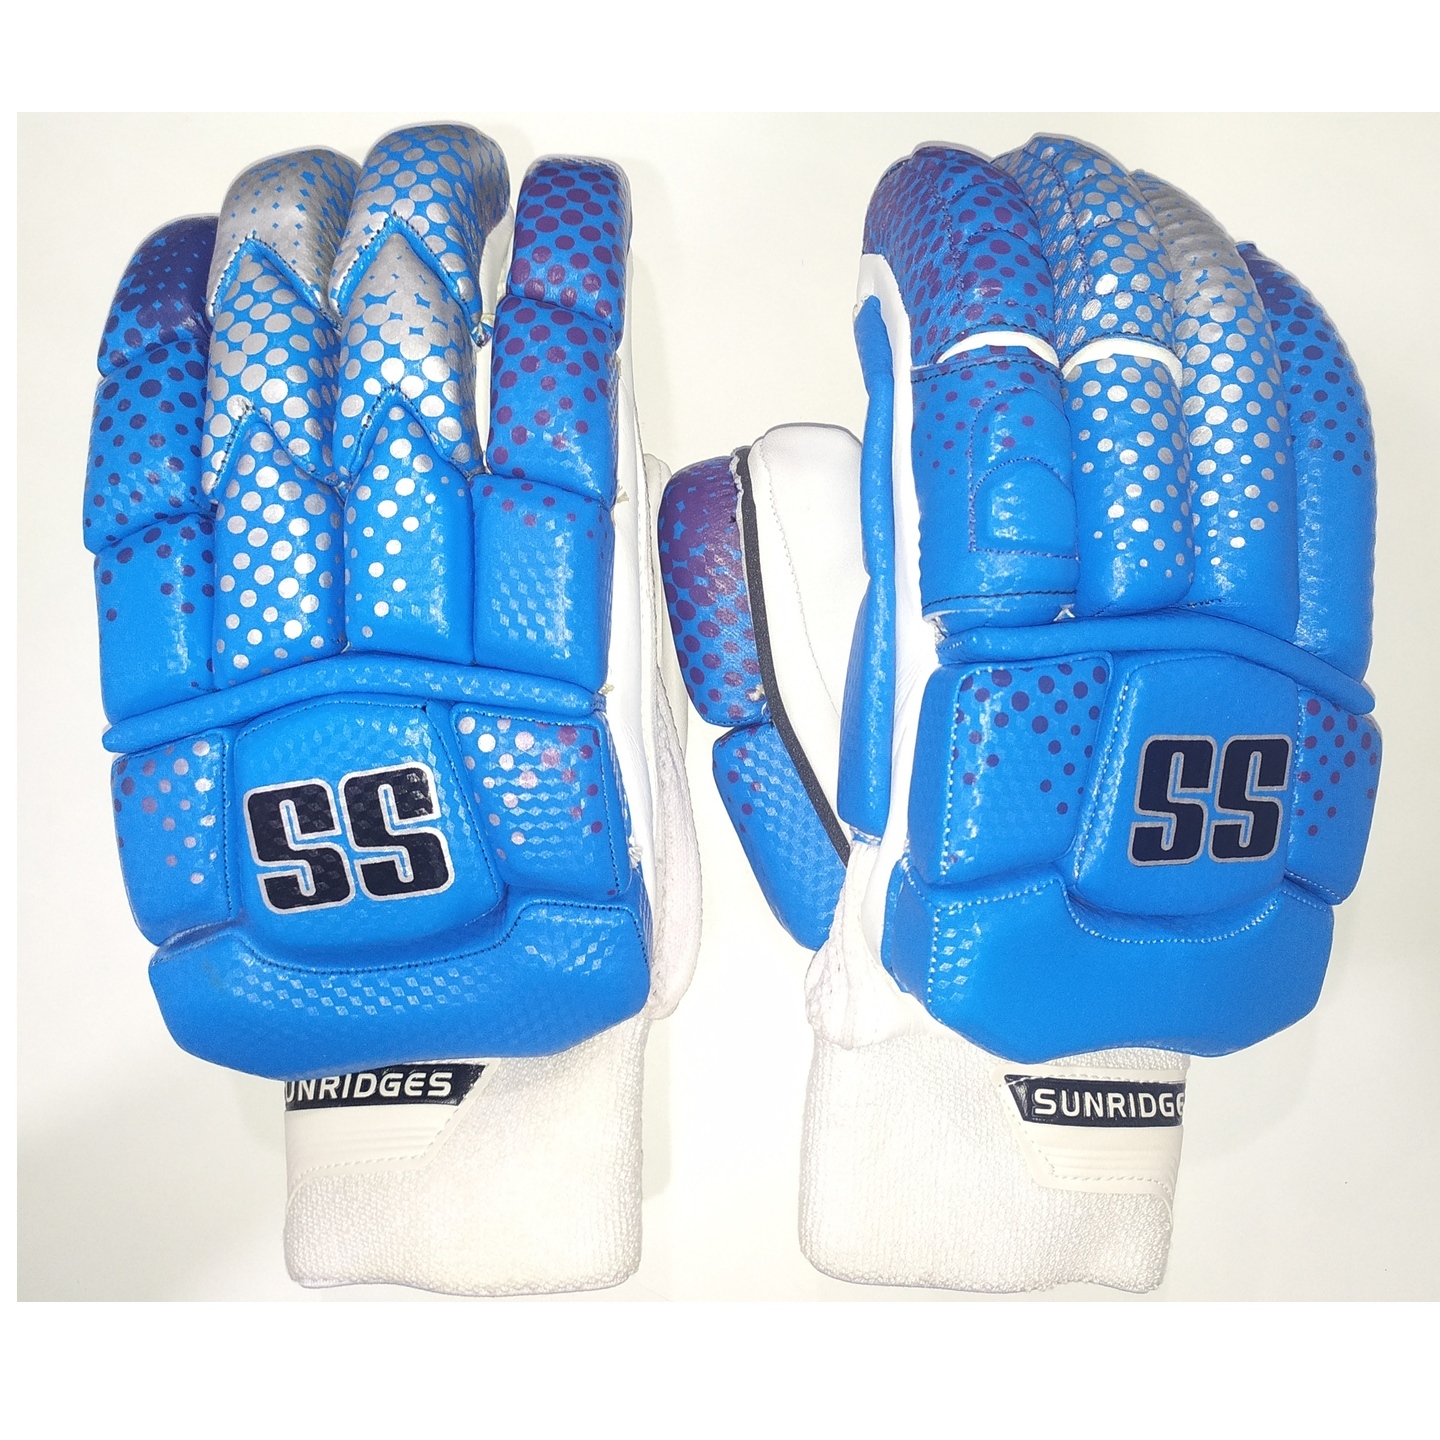 SS PLAYERS SMU CRICKET BATTING GLOVES, RIGHT HANDED